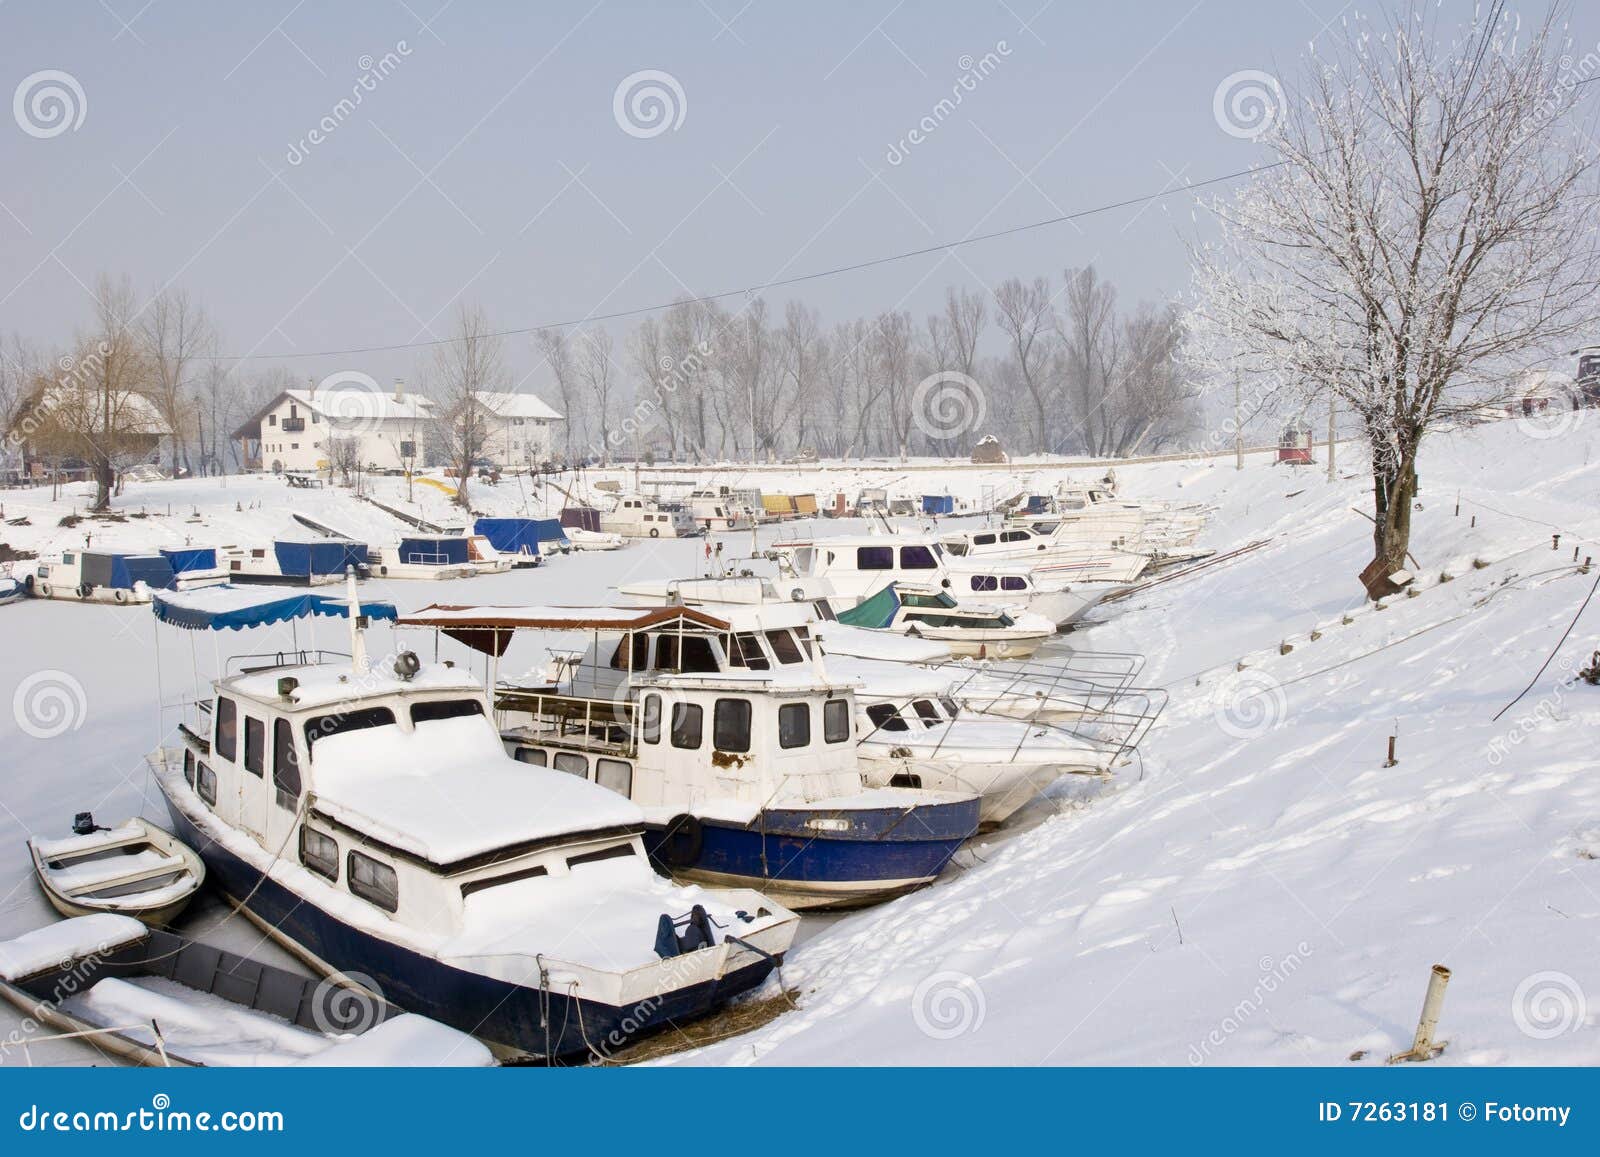 old boats in frozen marina